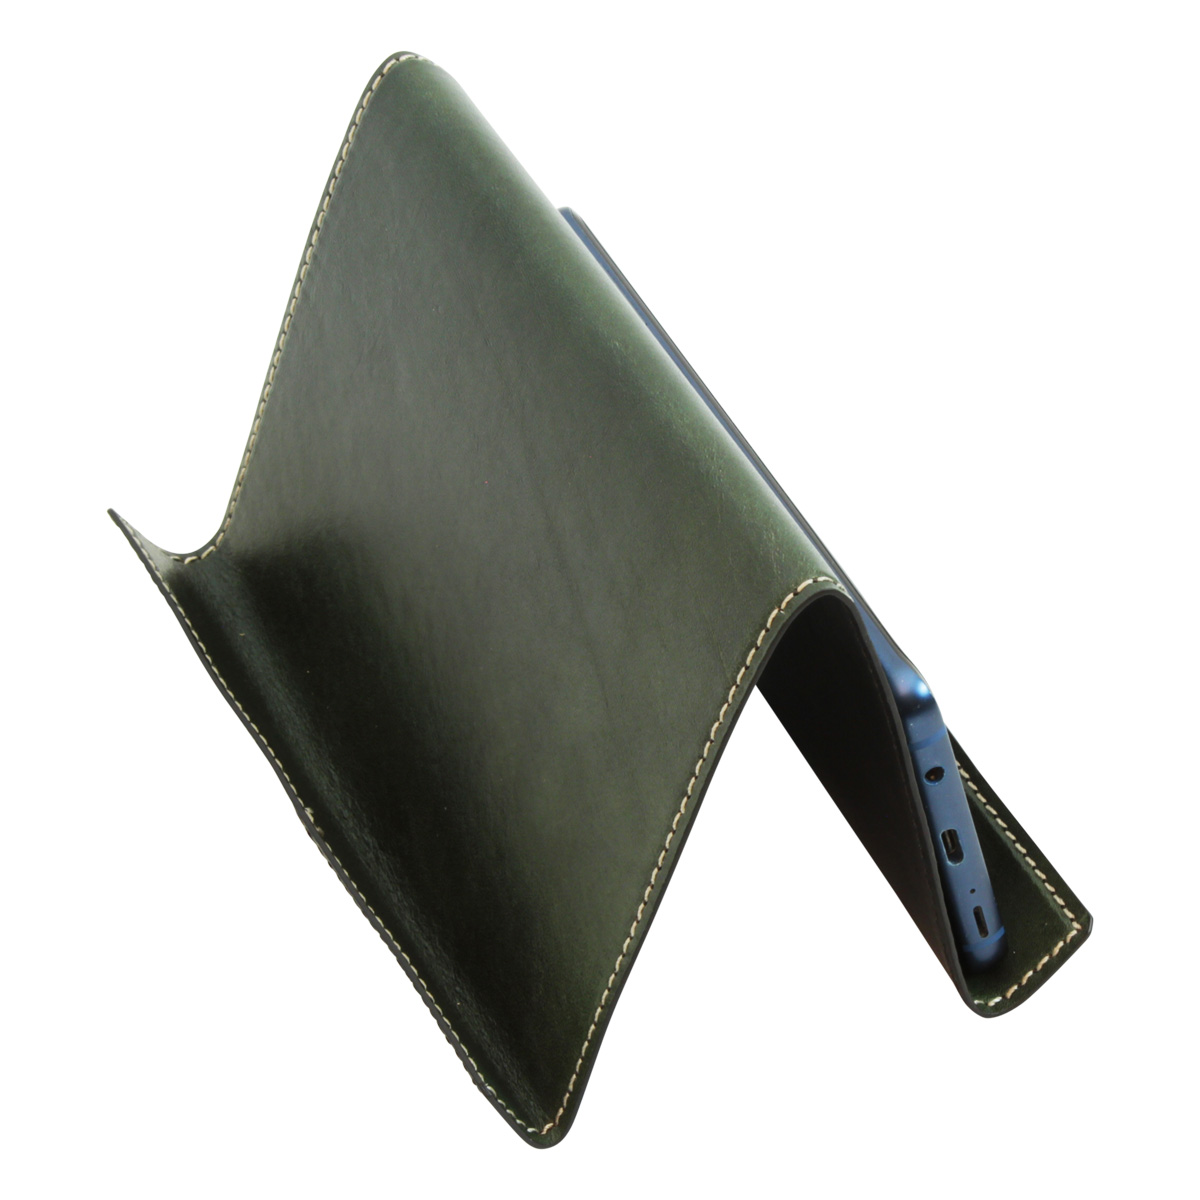 Leather ipad and iphone stand - green | 764089VE | EURO | Old Angler Firenze